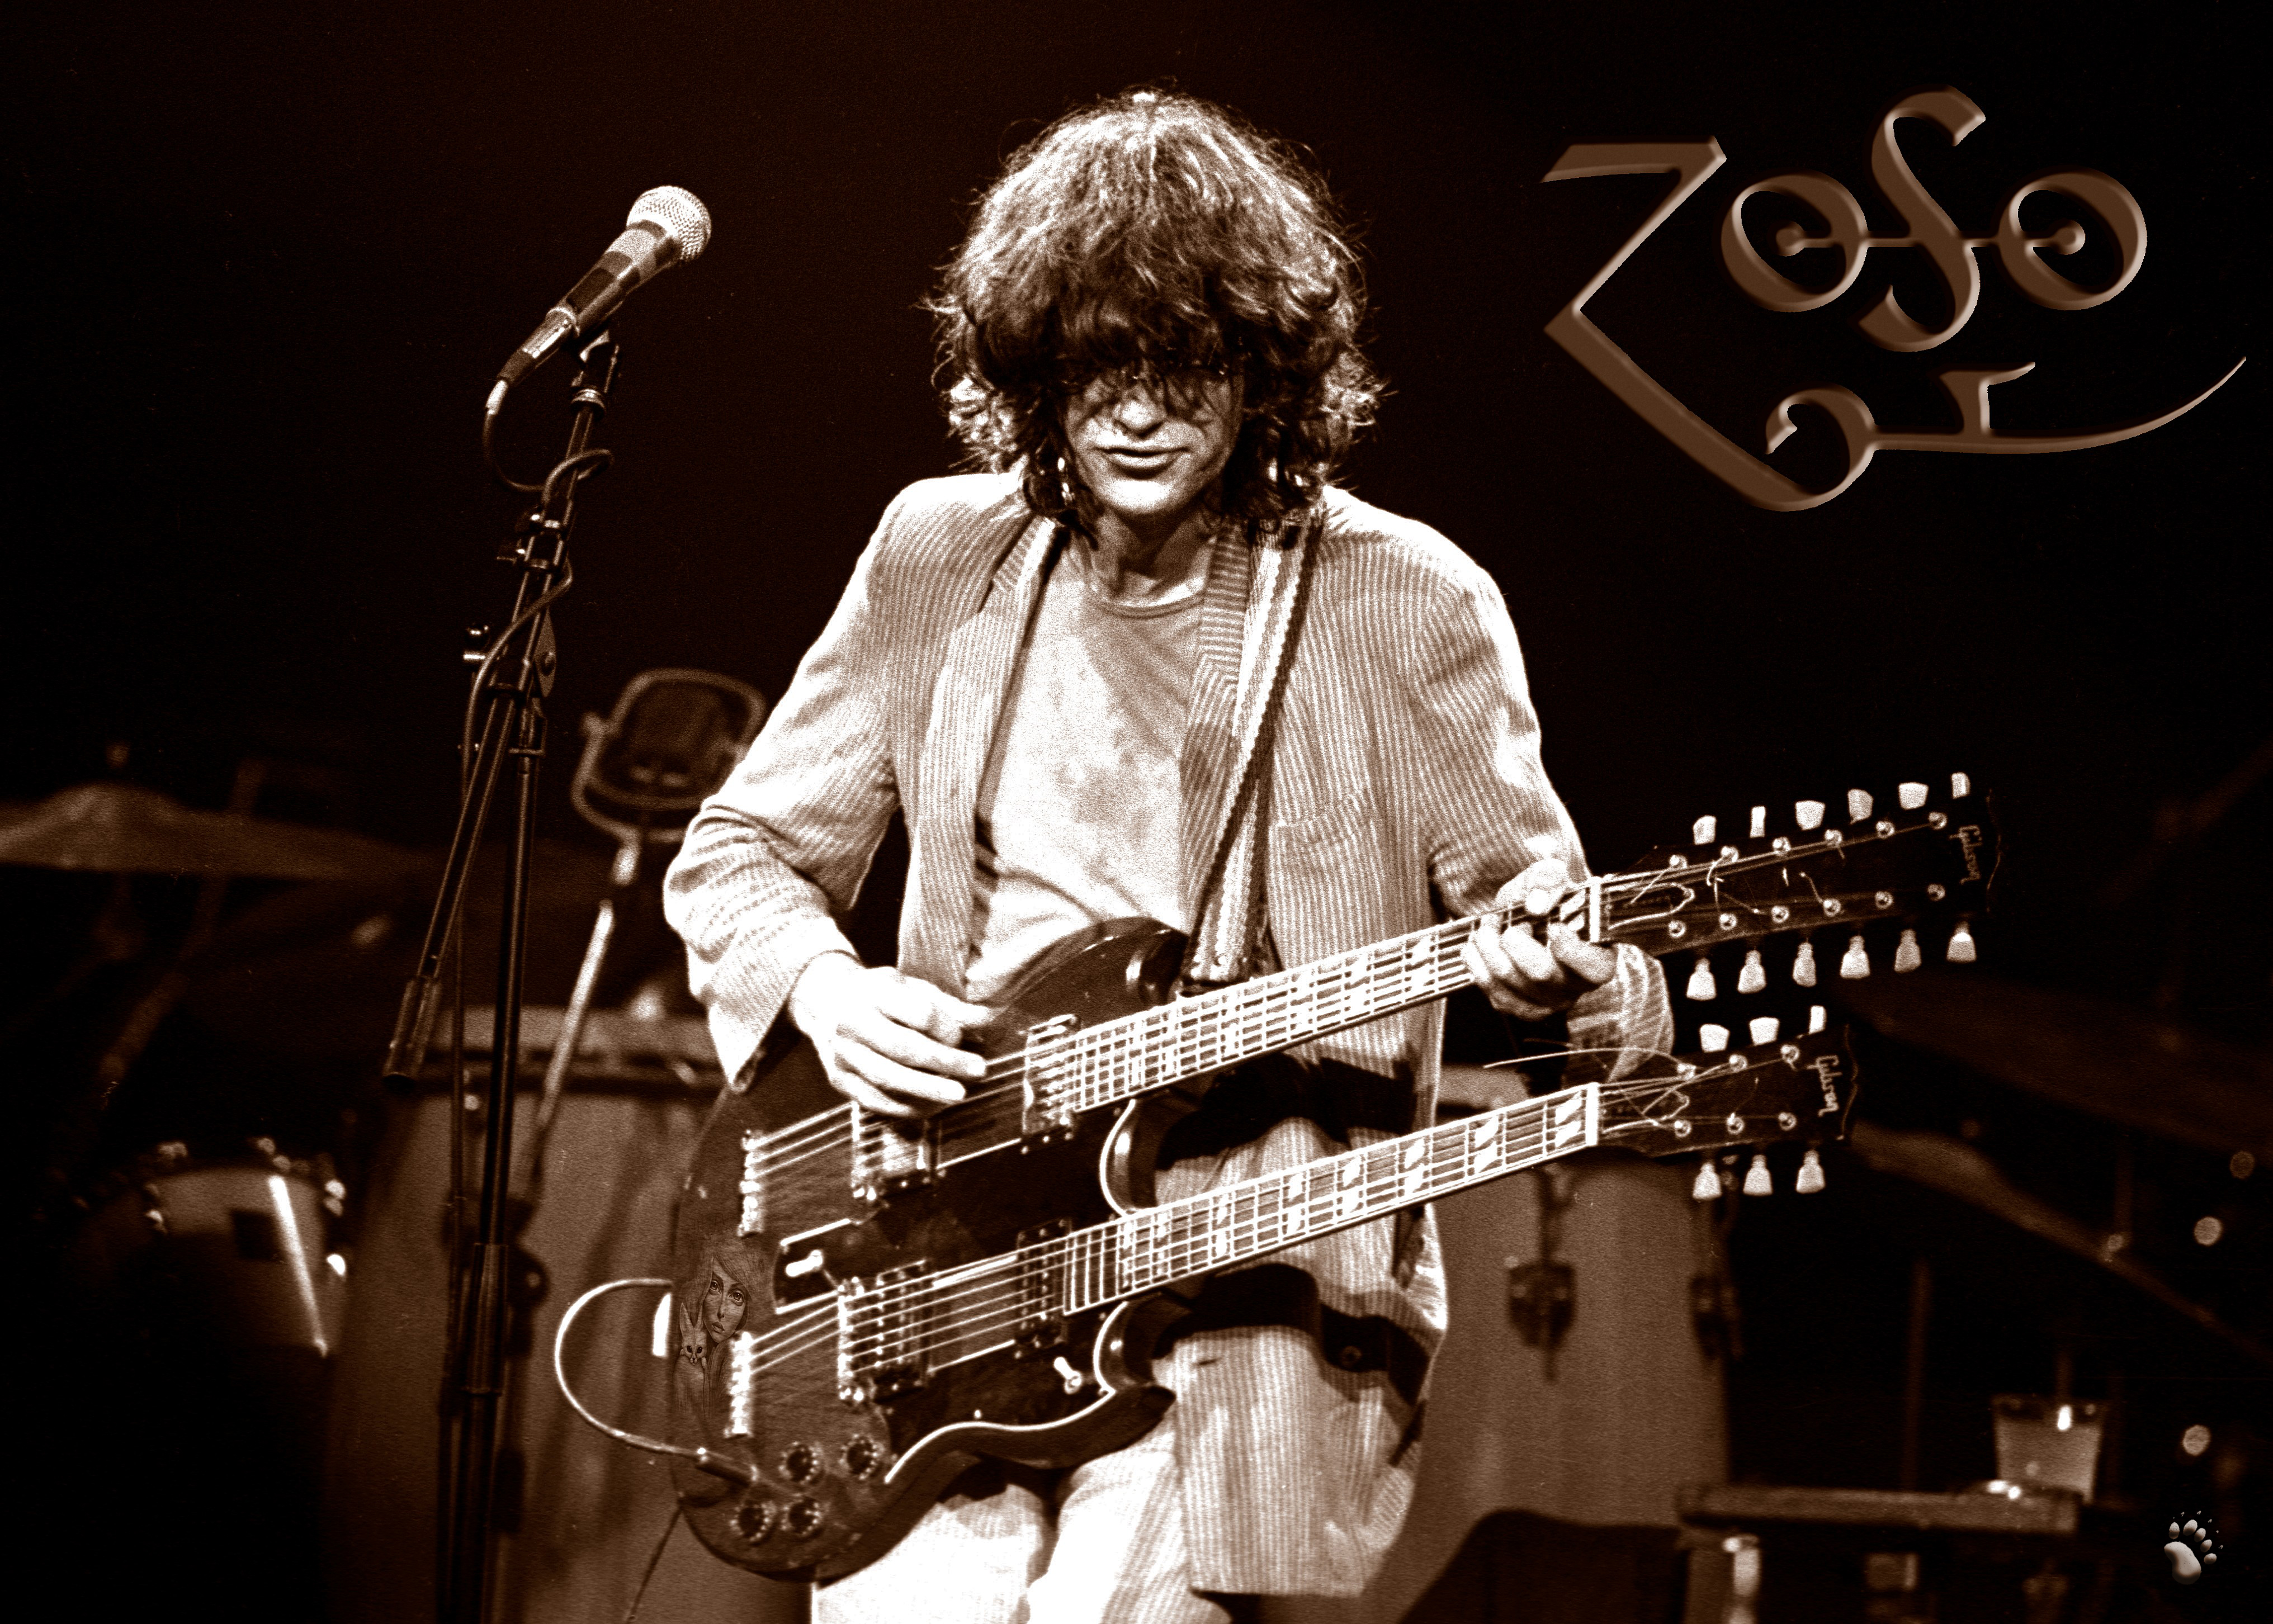 jimmy page wallpaper,string instrument,musical instrument,guitar,musician,music